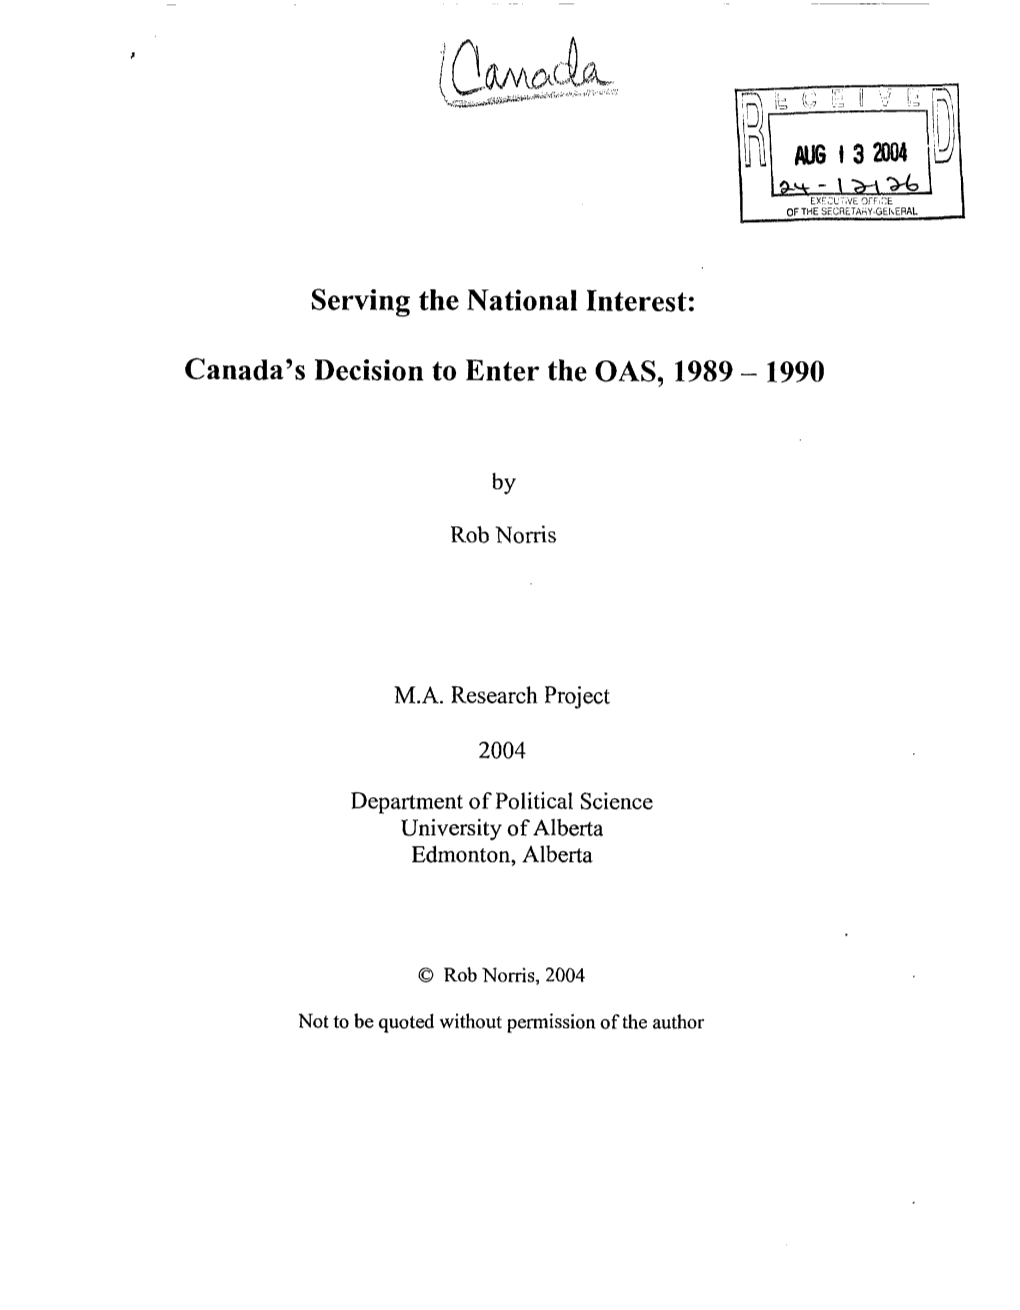 Serving the National Interest: Canada's Decision to Enter the OAS, 1989